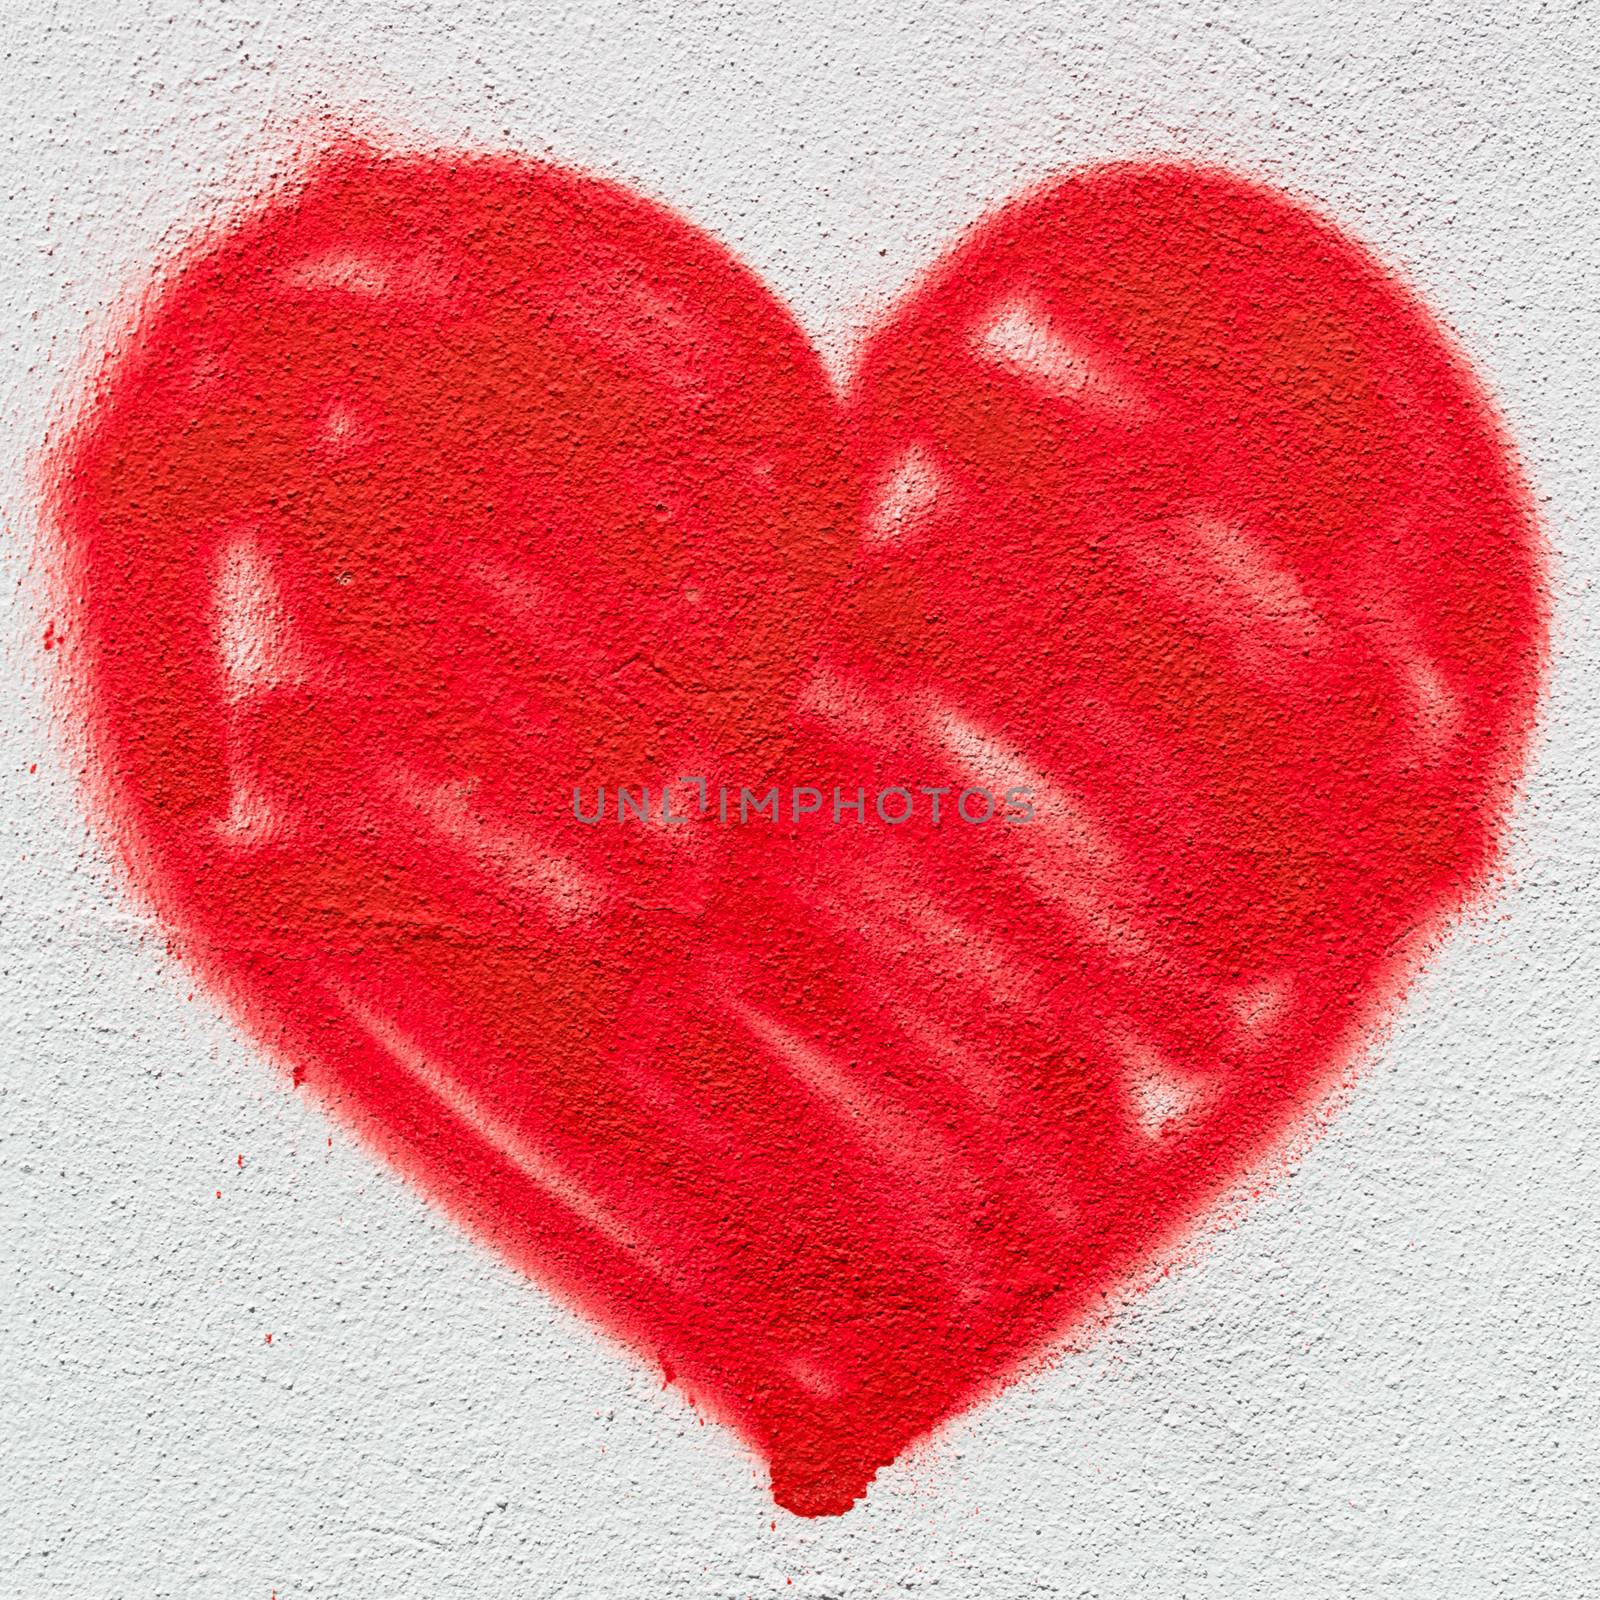 A big red heart, painted on the wall with spray paint.